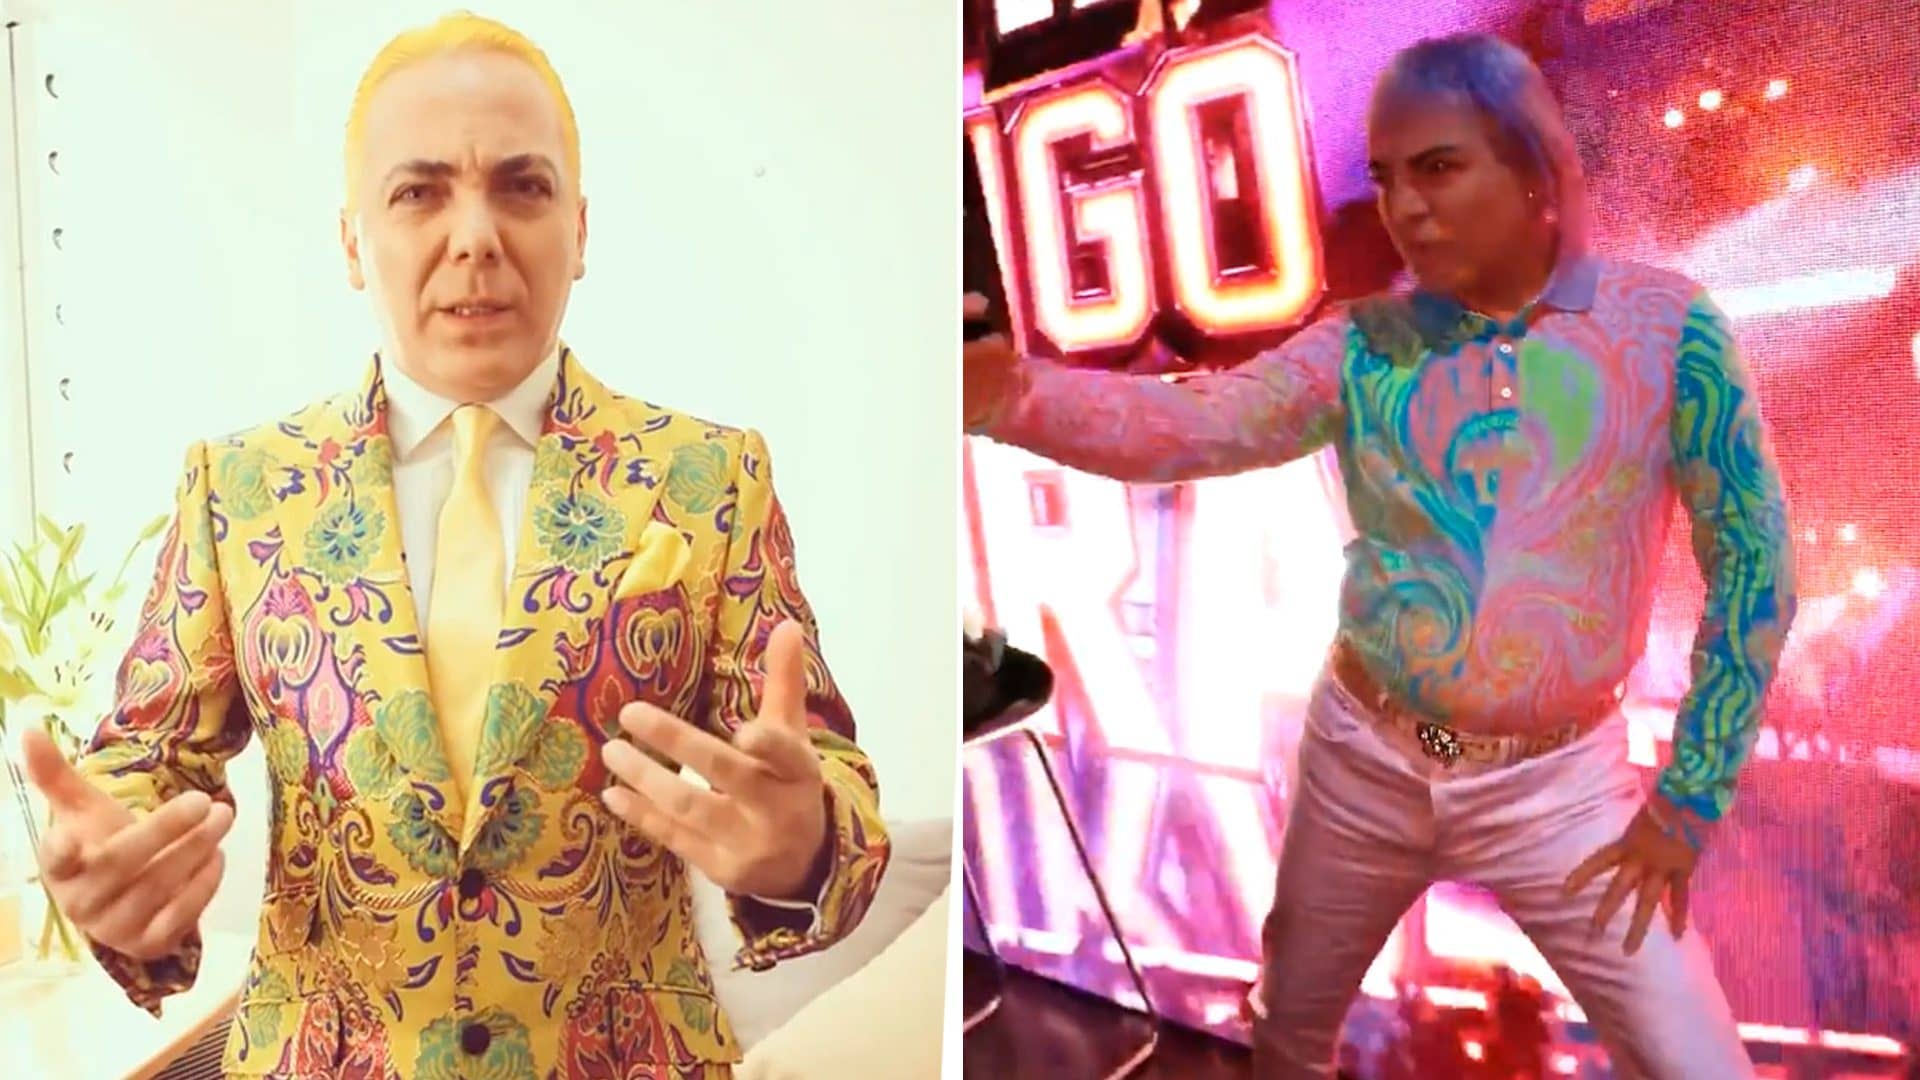 Cristian Castro caused a stir with his extravagant and colorful look (Image: Instagram/@cristiancastro/Twitter/@CantaConmigoAR)